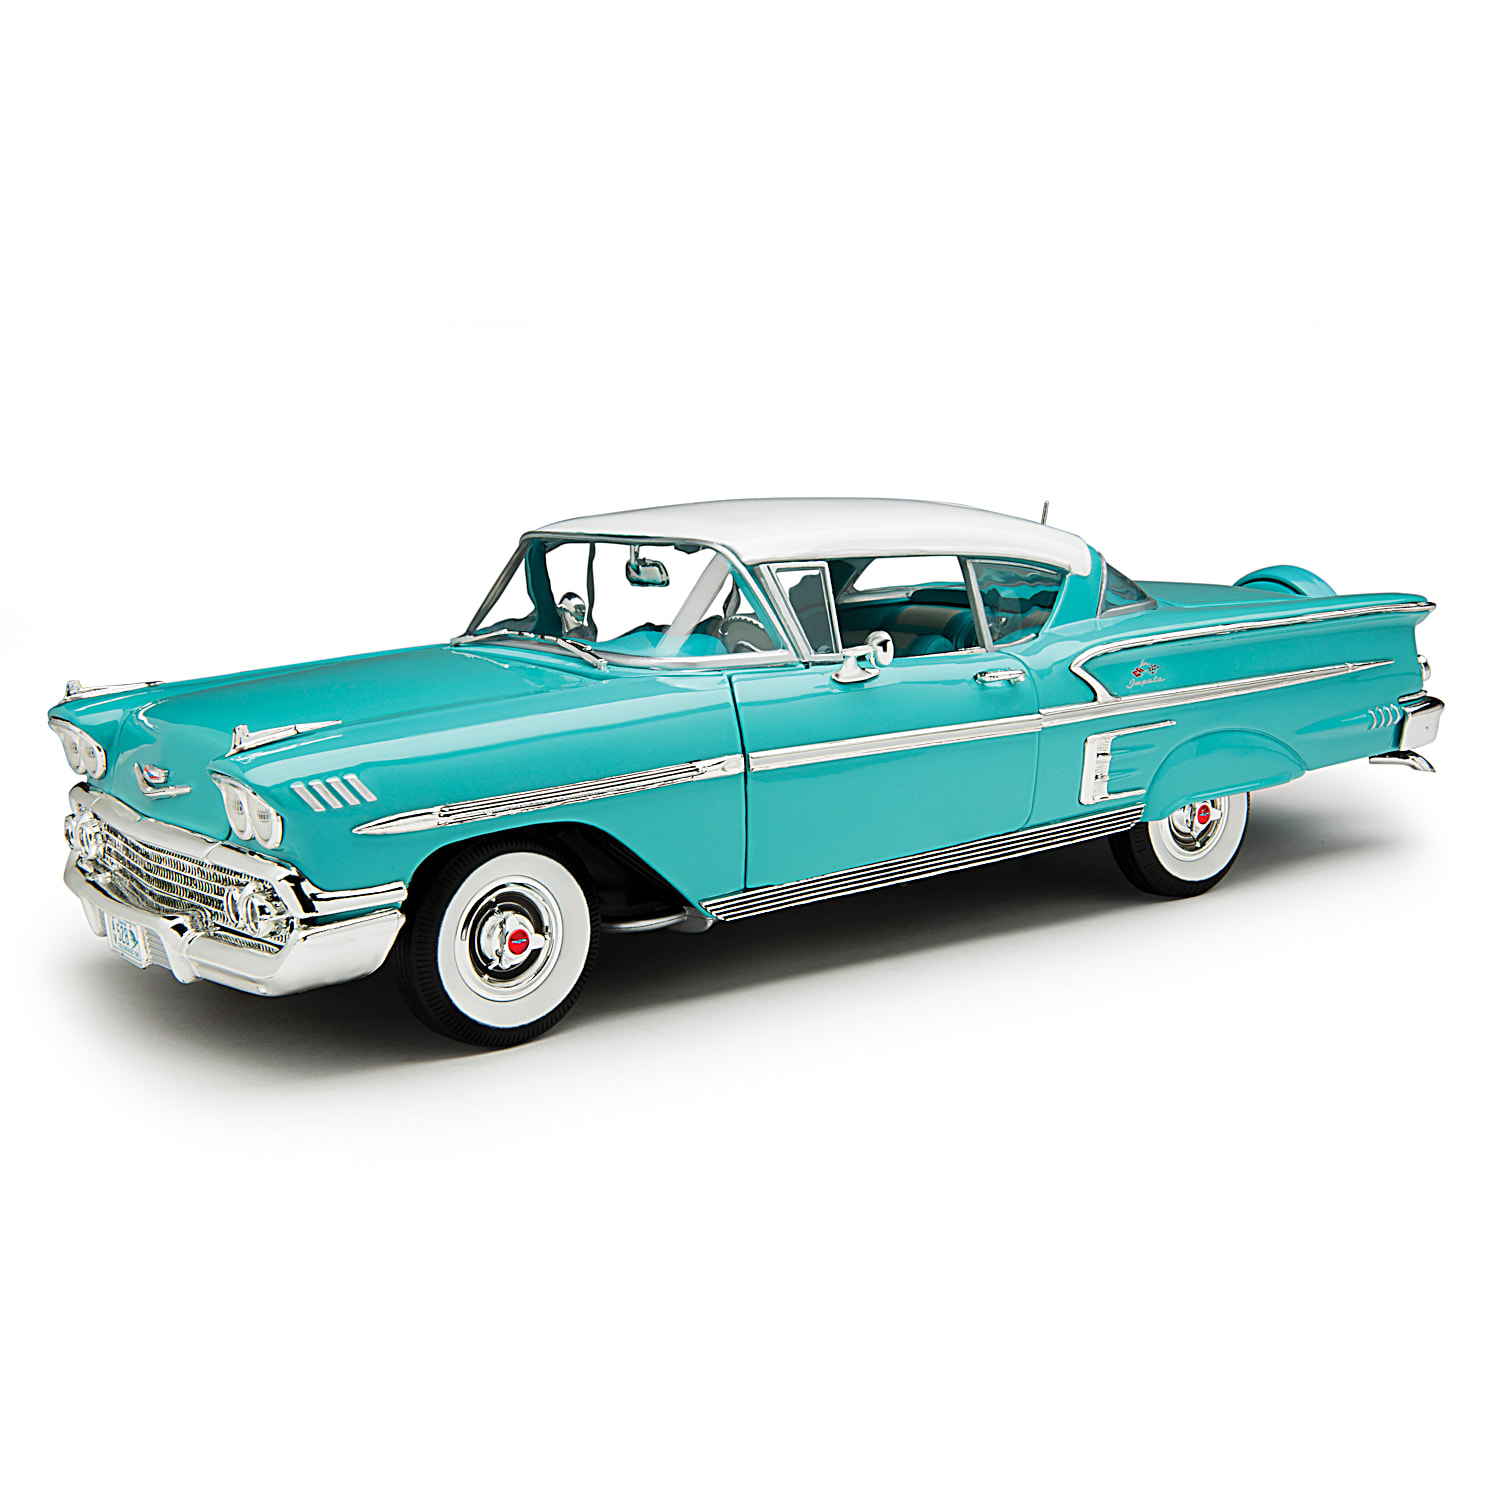 1:18-Scale 1958 Chevy Bel Air Impala Diecast Car With Rubber Tires ...